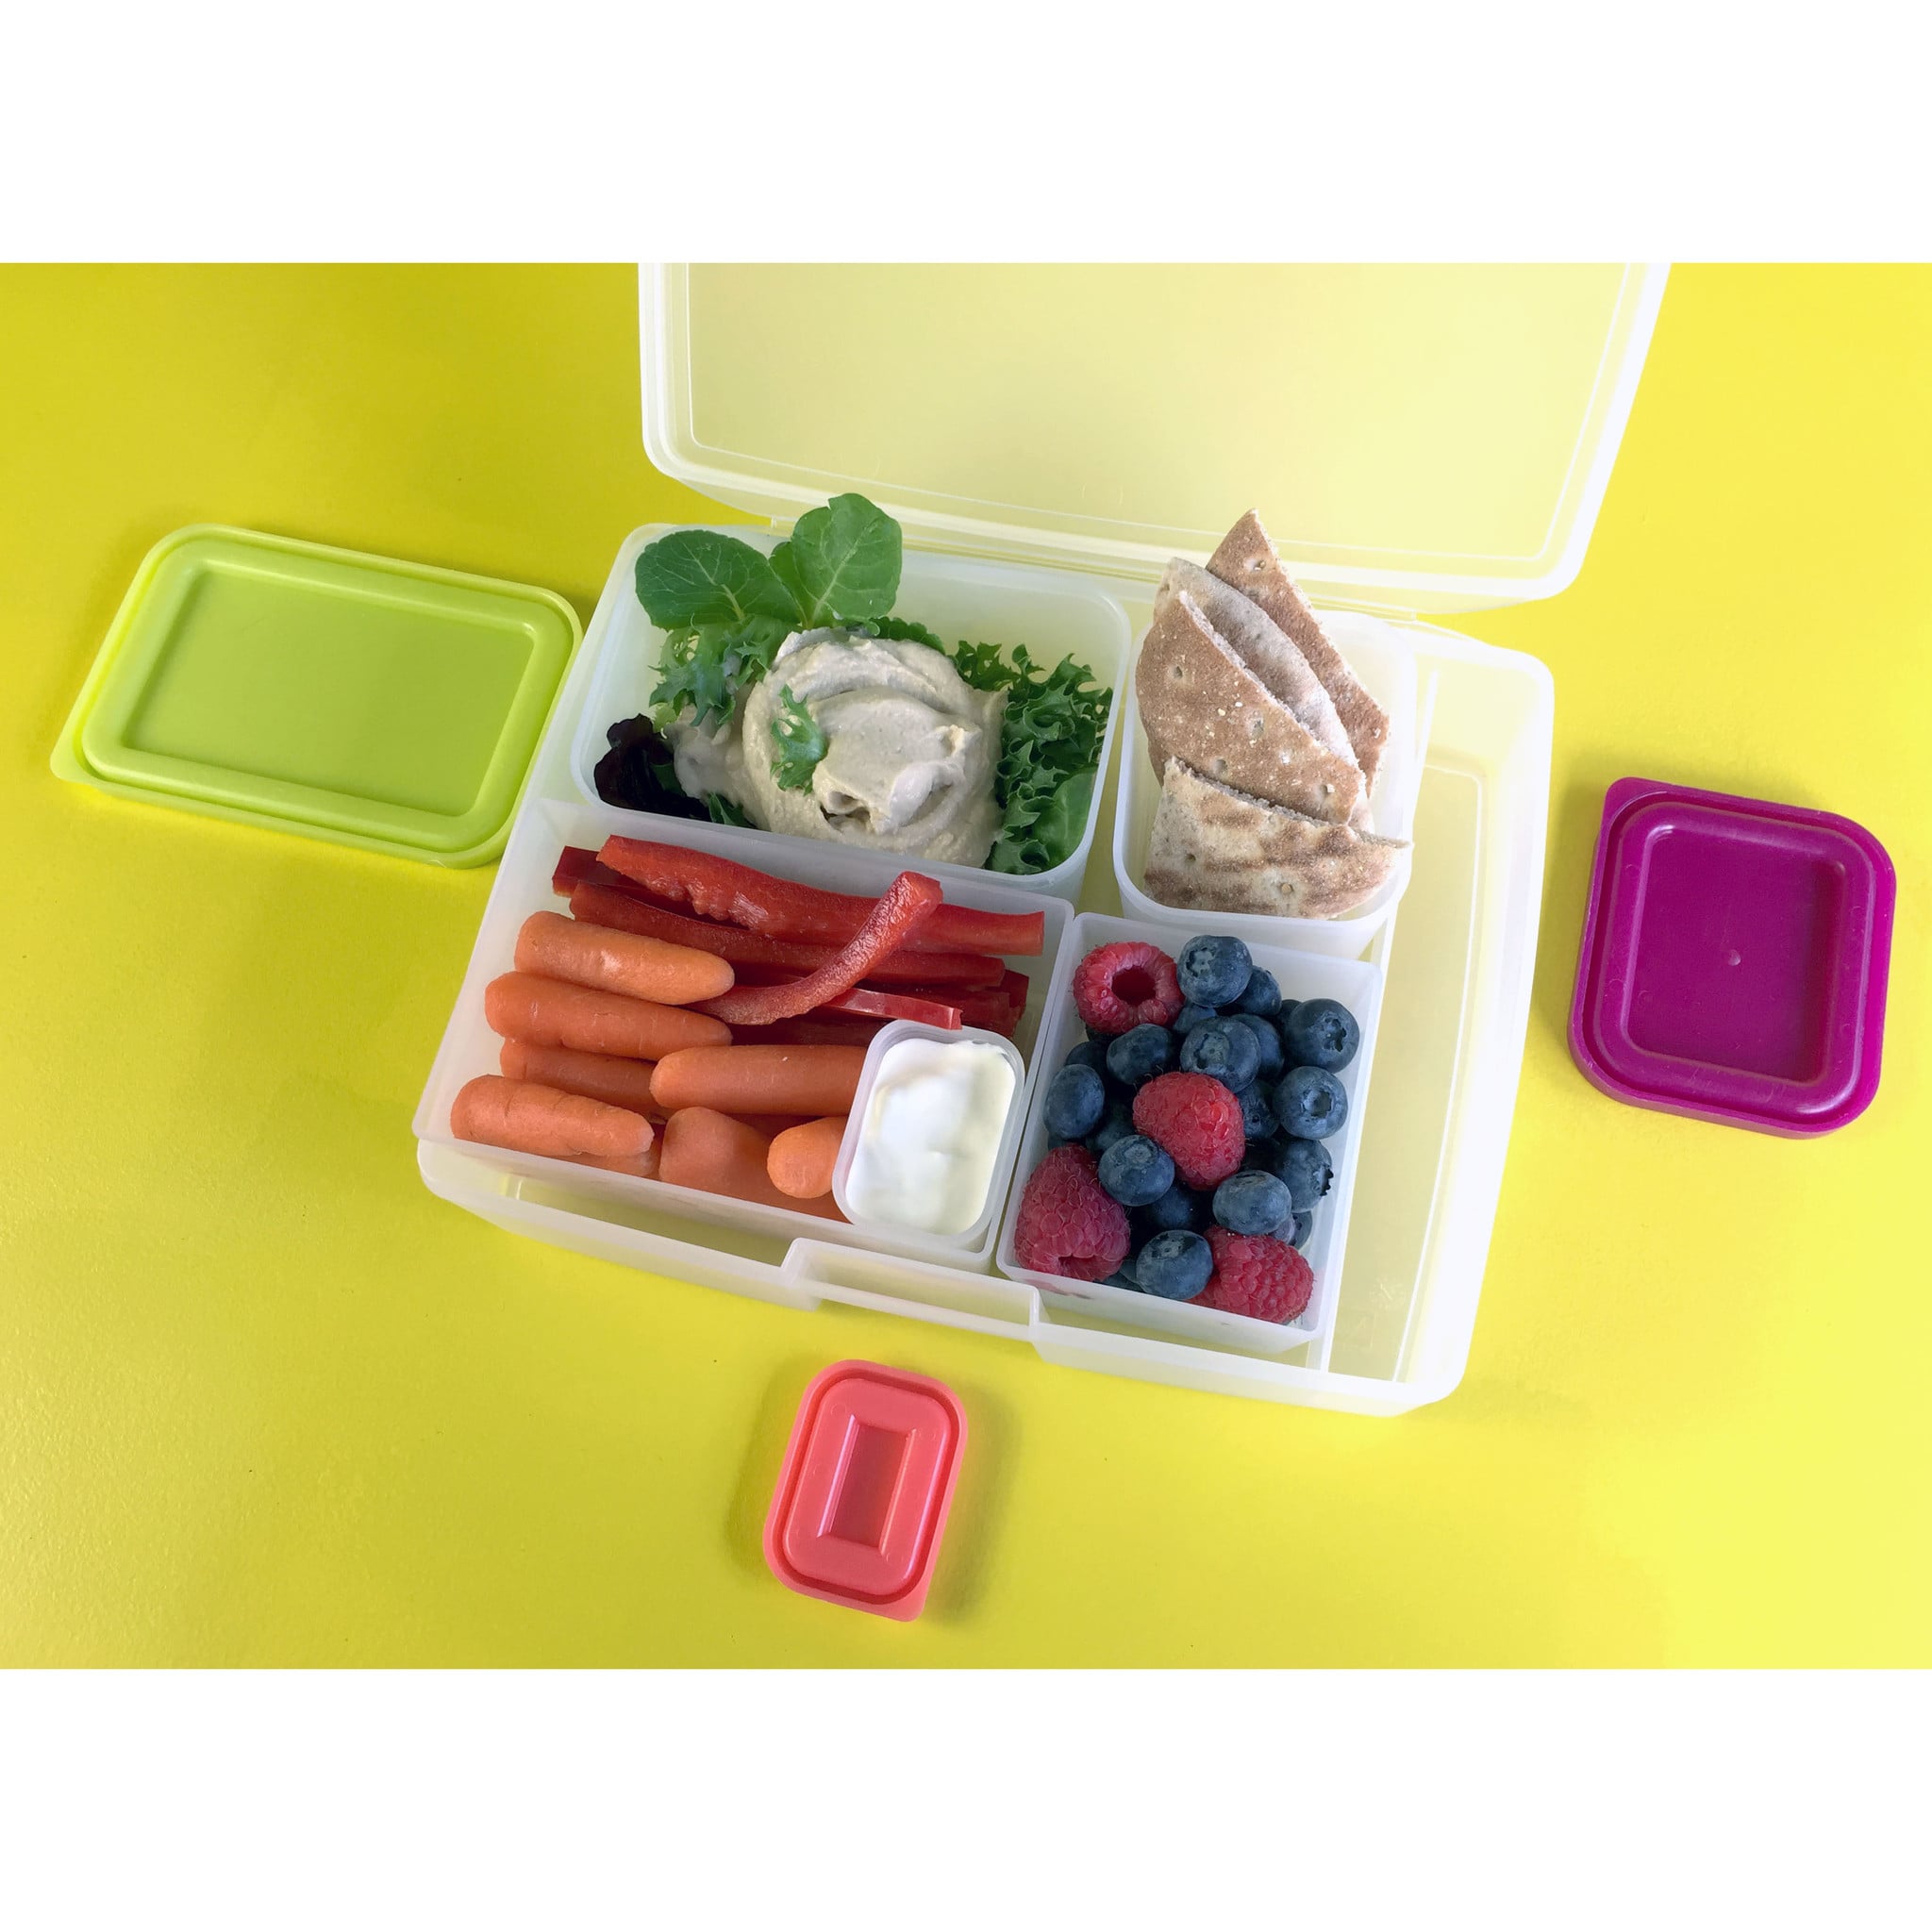 Weight loss tip #176 - Buy portion control lunch boxes